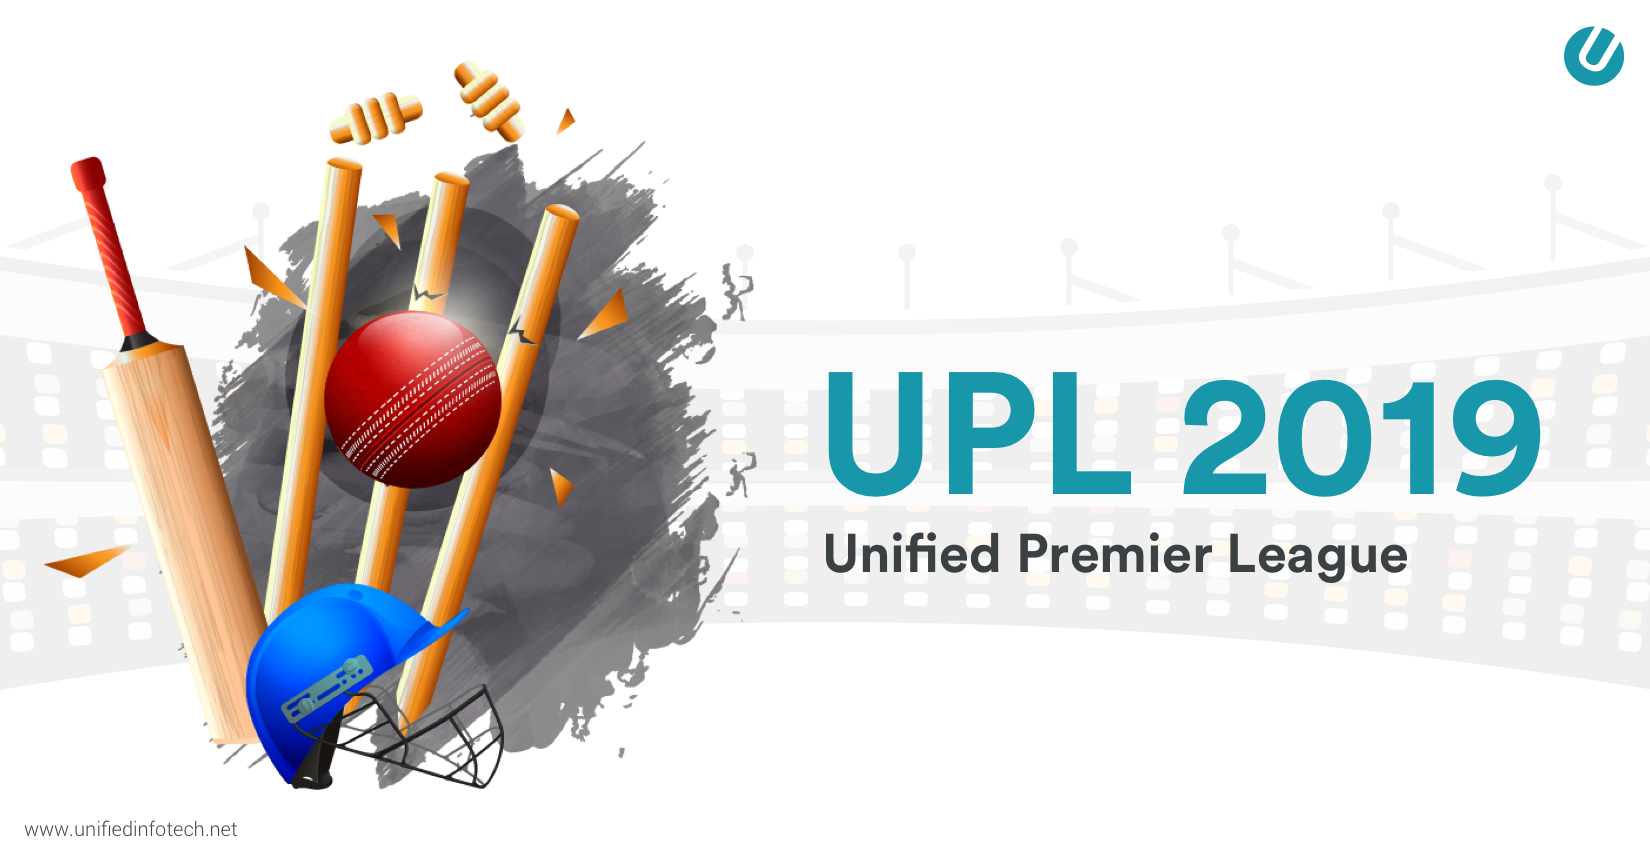 Unified Premier League 2019 Cup – A Fun Cricket Day Out!